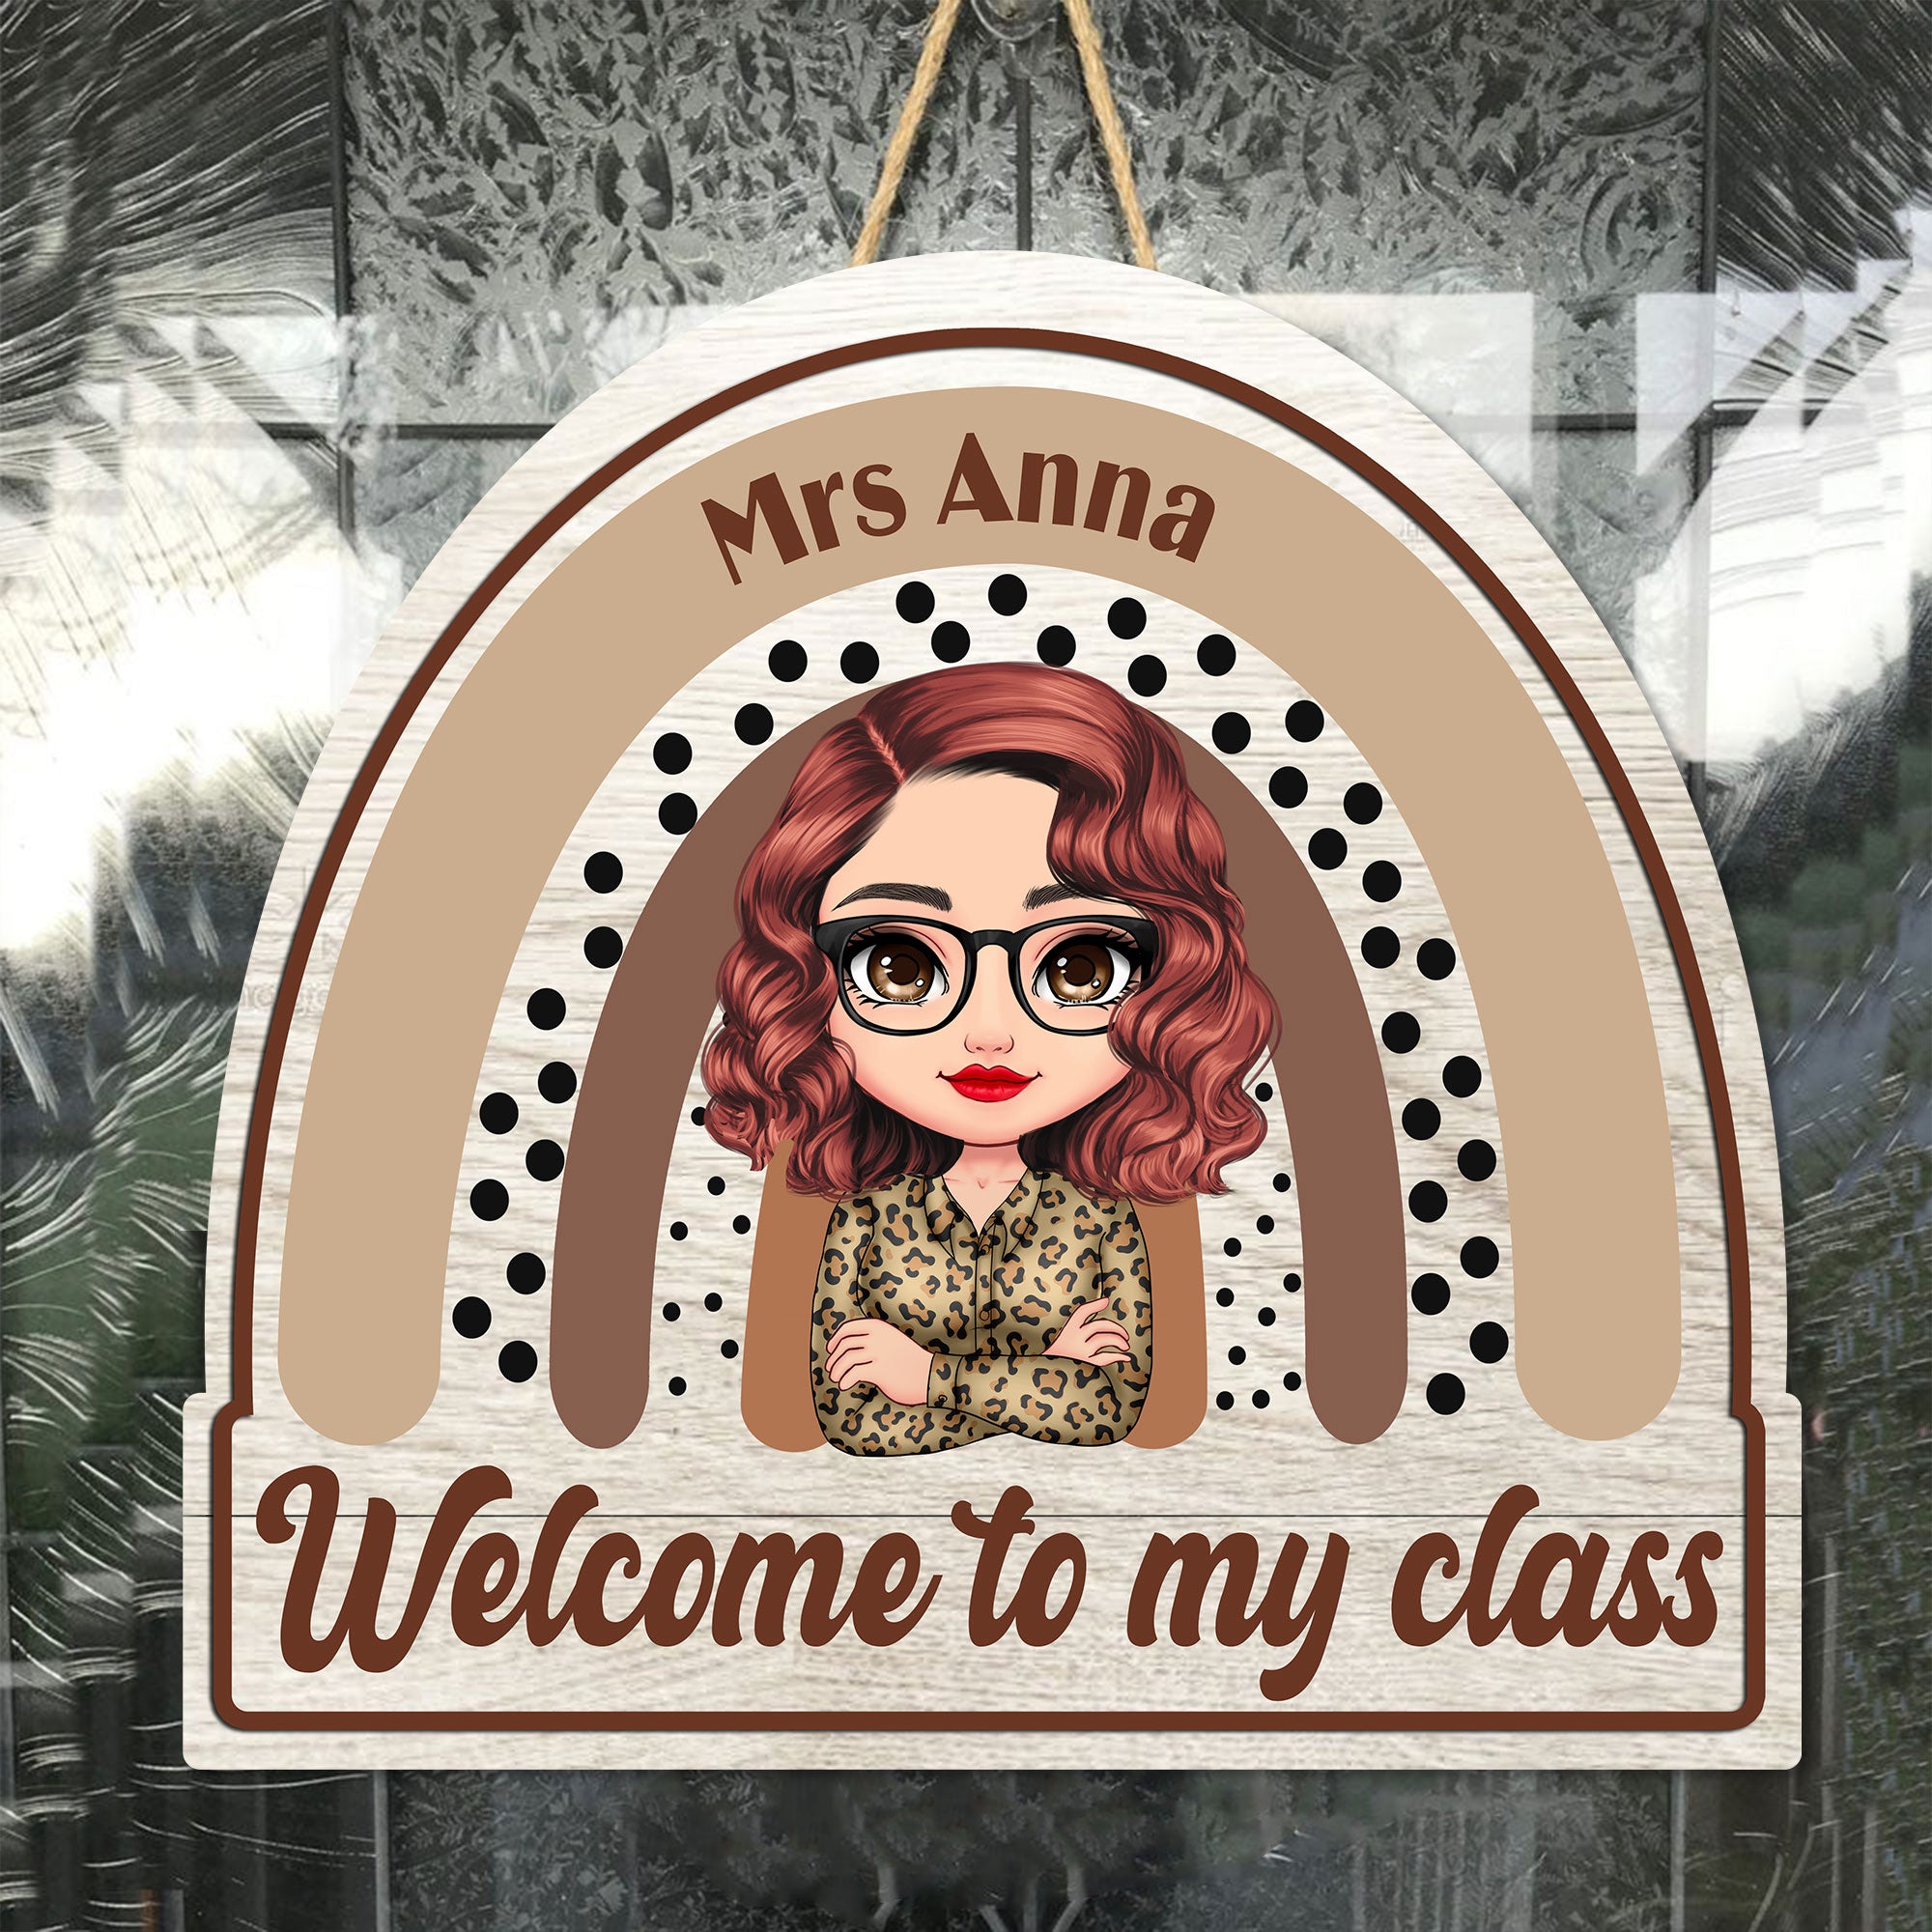 Welcome To My Class - Custom Appearance And Name - Personalized Wooden Door Sign - Back To School